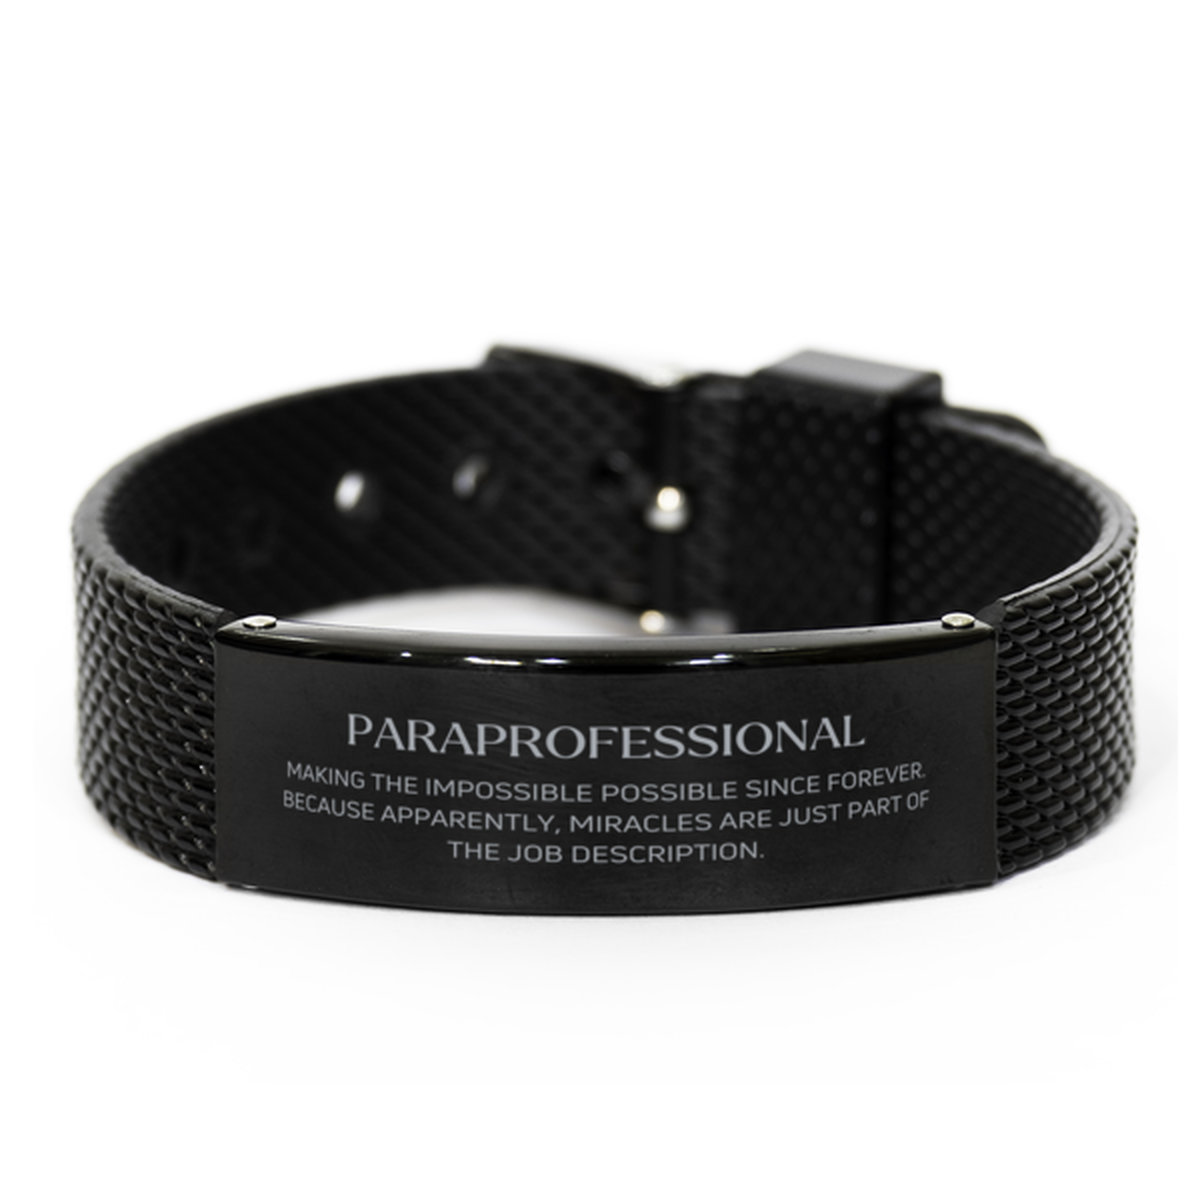 Funny Paraprofessional Gifts, Miracles are just part of the job description, Inspirational Birthday Black Shark Mesh Bracelet For Paraprofessional, Men, Women, Coworkers, Friends, Boss